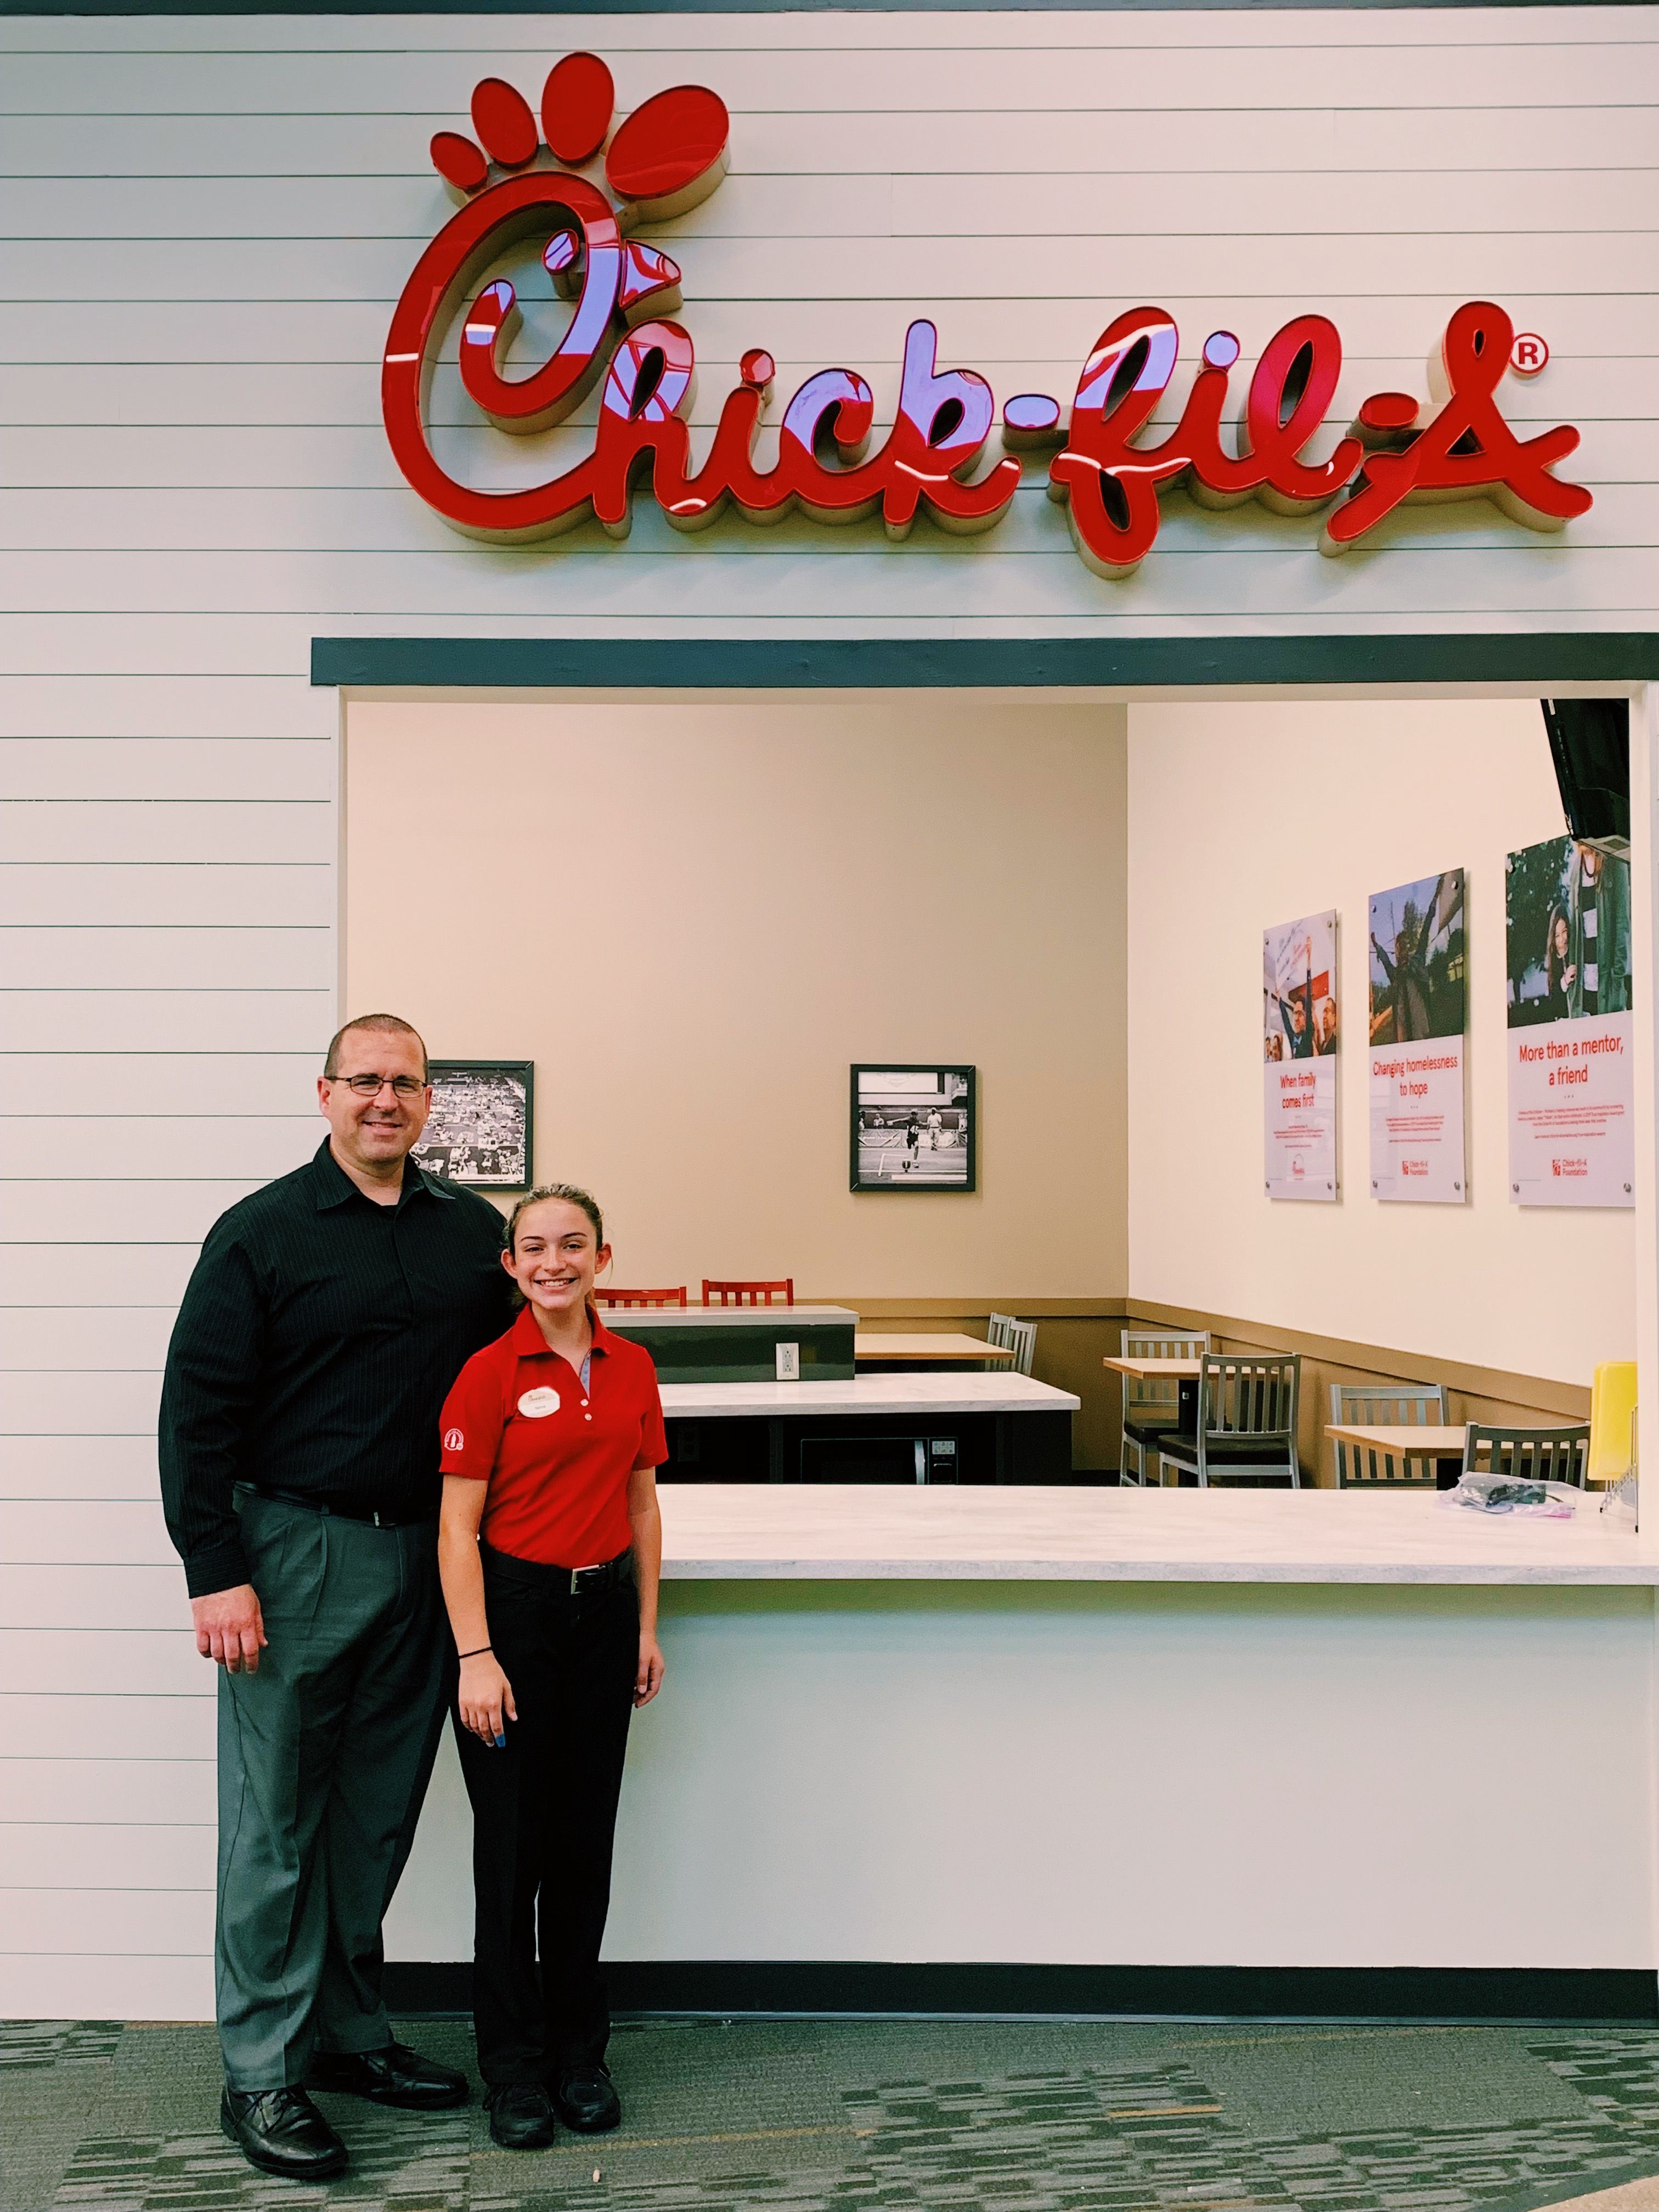 Tony and Sierra at the JA Finance Park Chick-fil-A storefront in Fort Wayne, Indiana